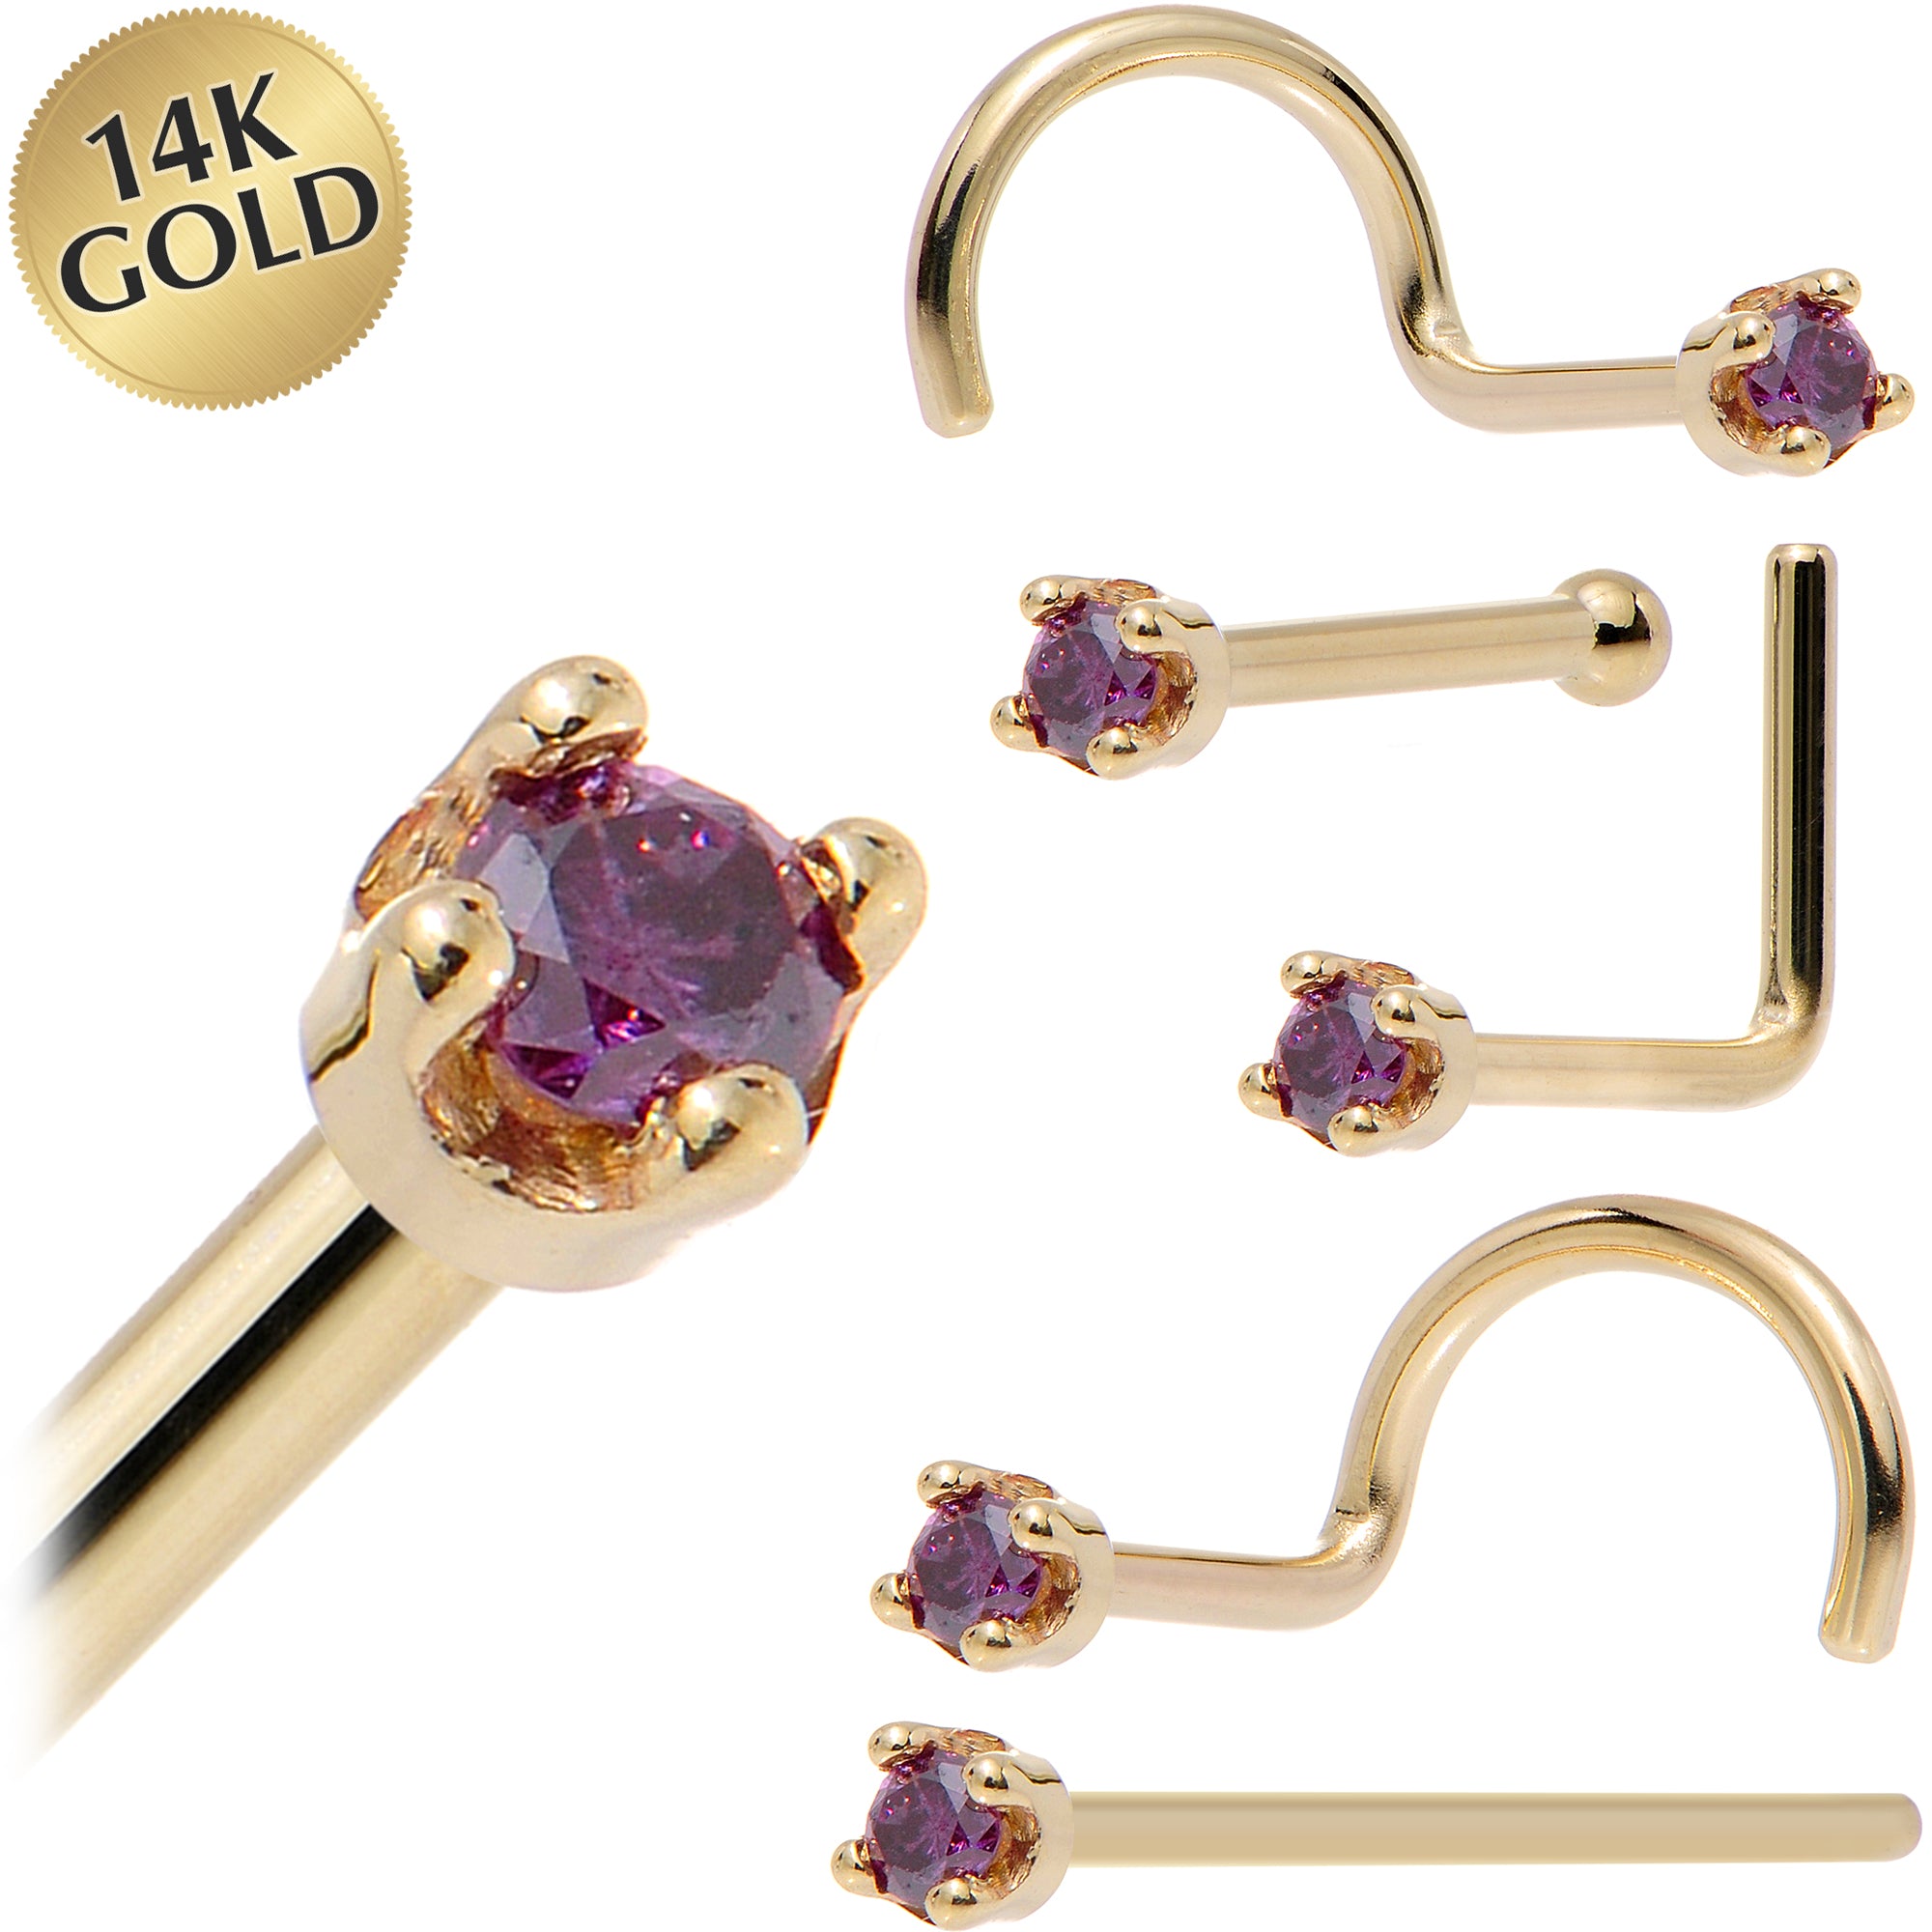 Solid 14KT Yellow Gold (February) 1.5mm Genuine Purple Diamond Nose Ring